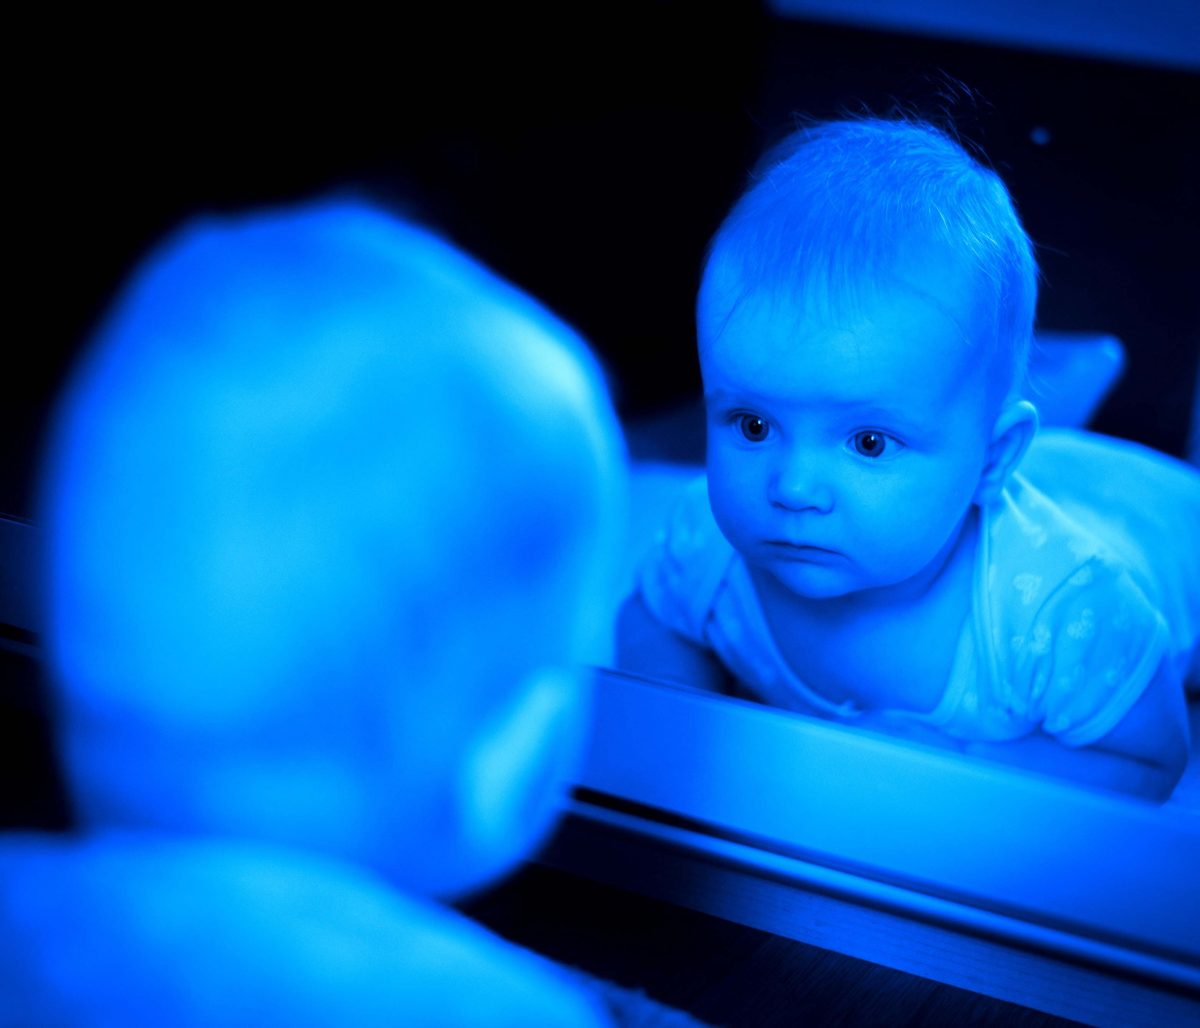 Baby with mirror